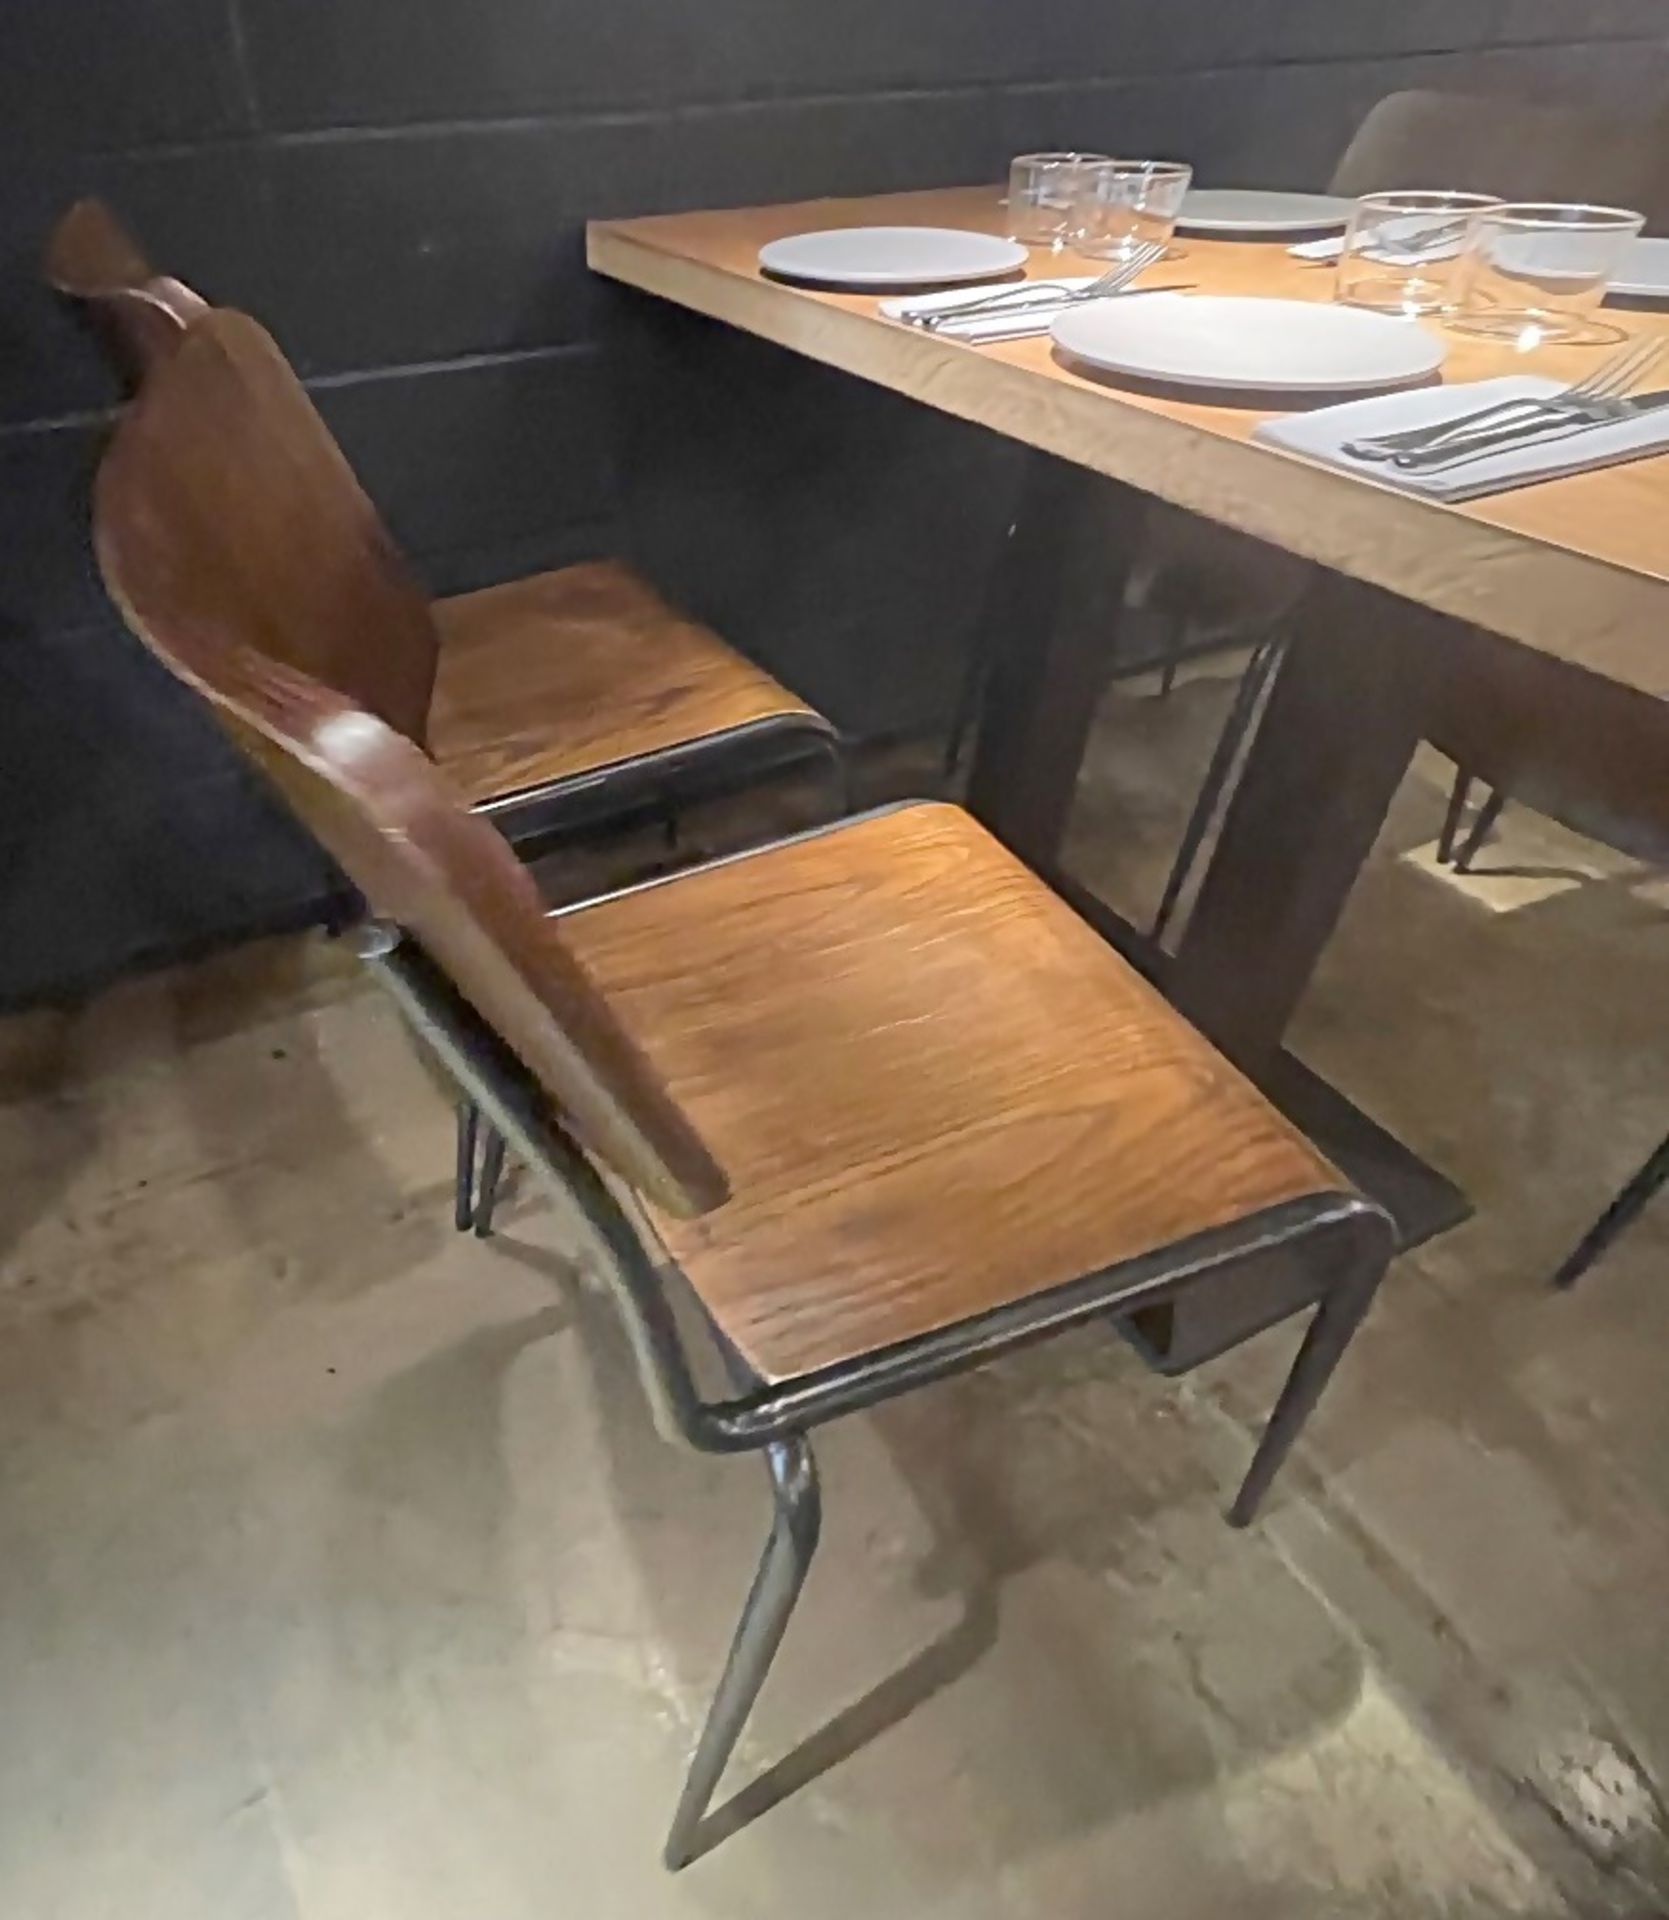 15 x Bistro Dining Chairs Featuring Wooden Back And Seats With Sturdy Metal Frames - Ref: MAN142 - - Image 2 of 8